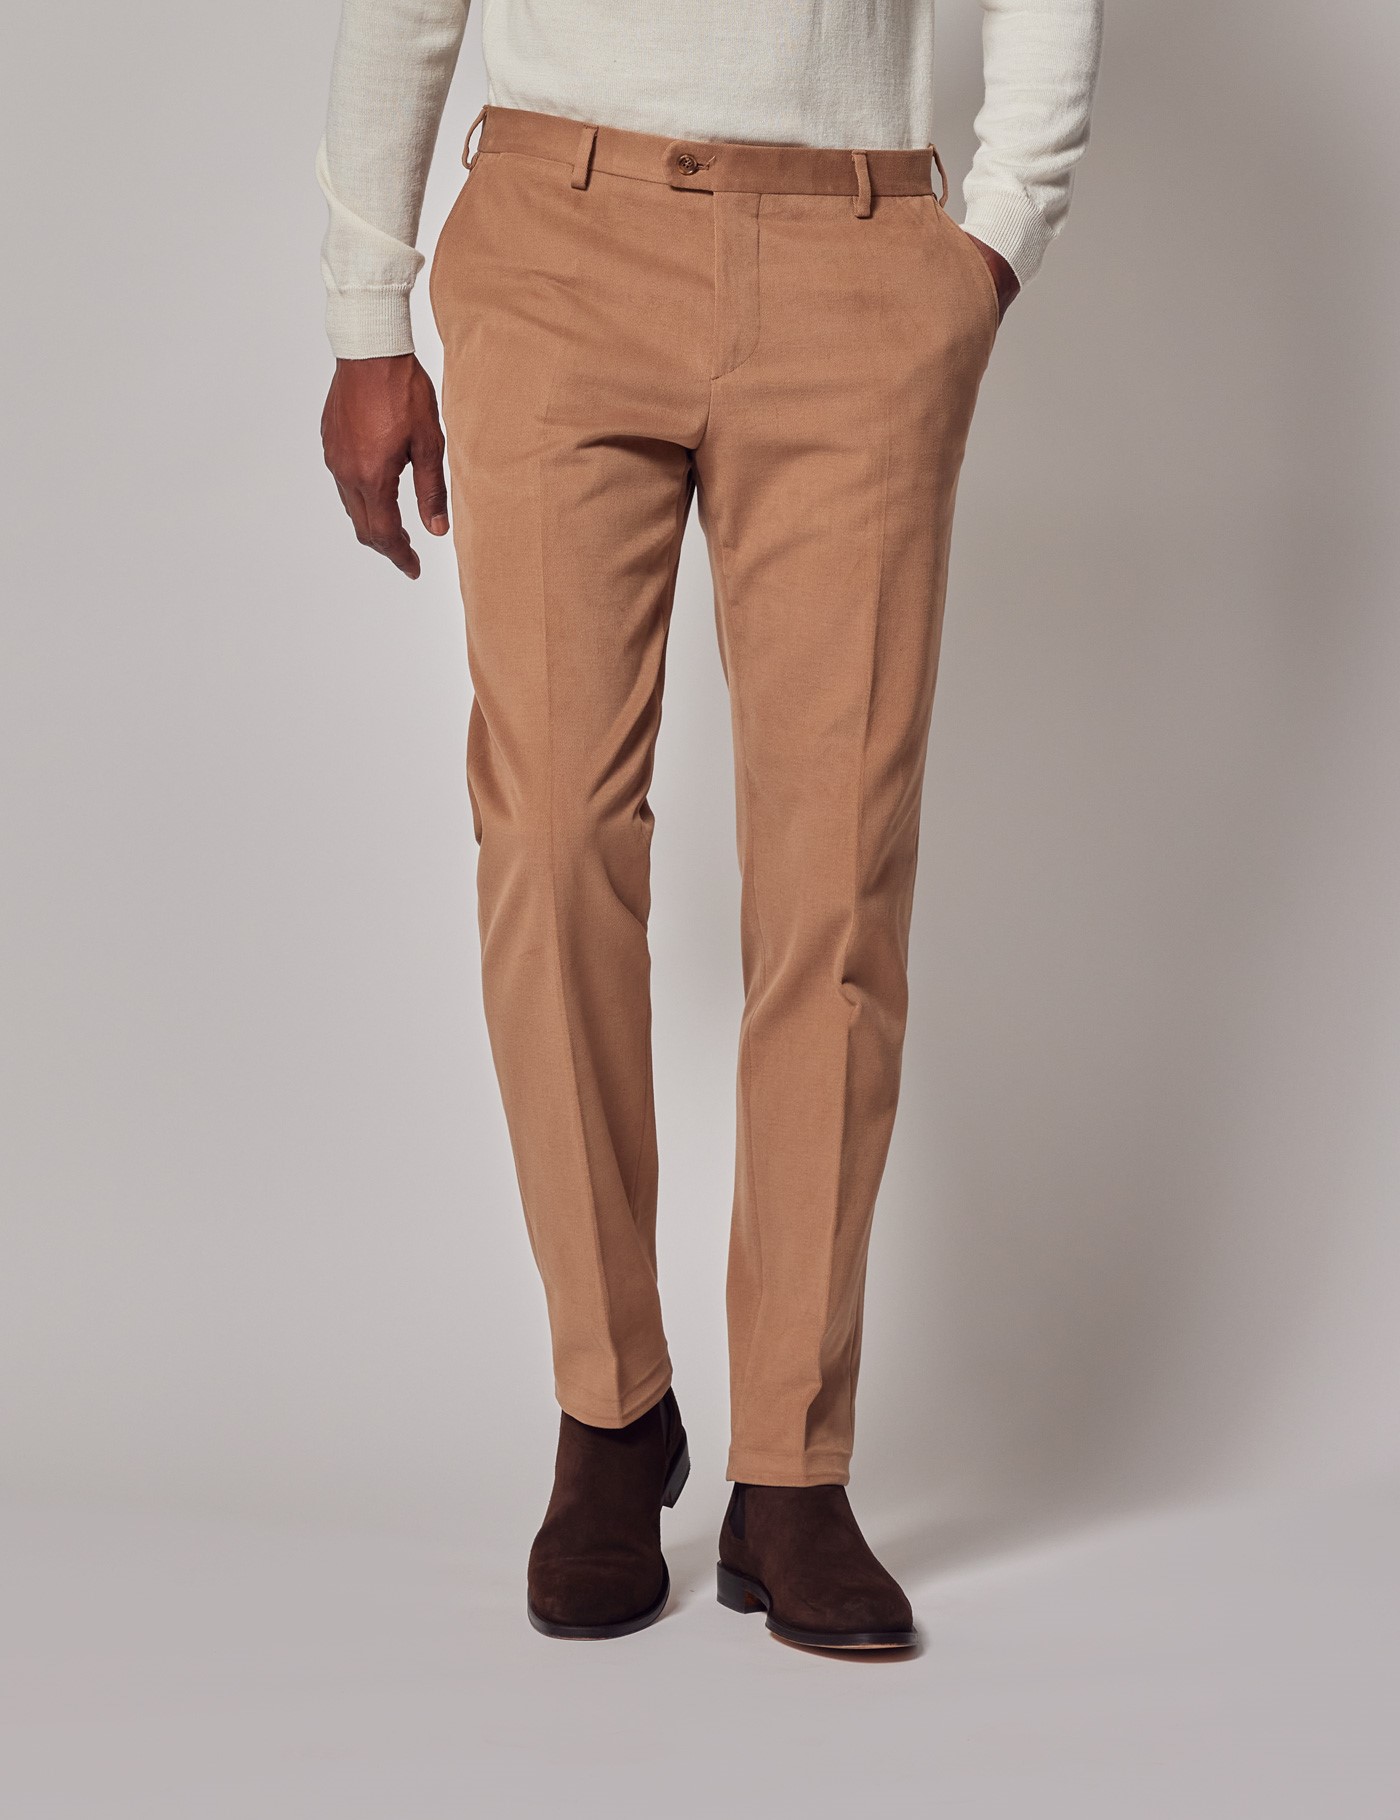 Men's Tailored Trousers & Pants - Flat Front & Pleated | Berle